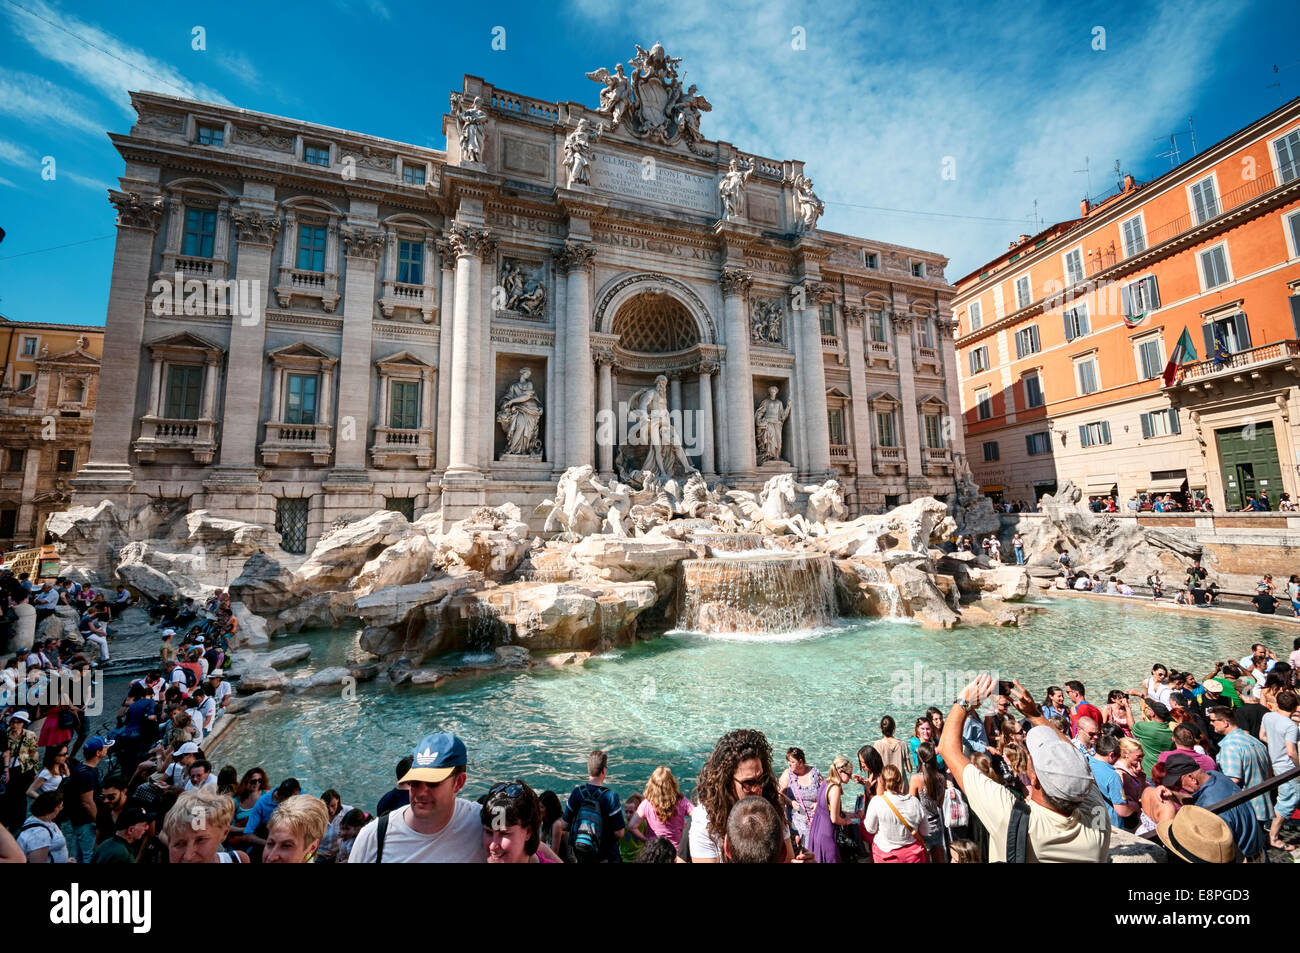 Rome, Italy - May 12, 2012: Tourists visiting the Trevi Fountain. Trevi Fountain is an iconic symbol of Imperial Rome. It is one Stock Photo